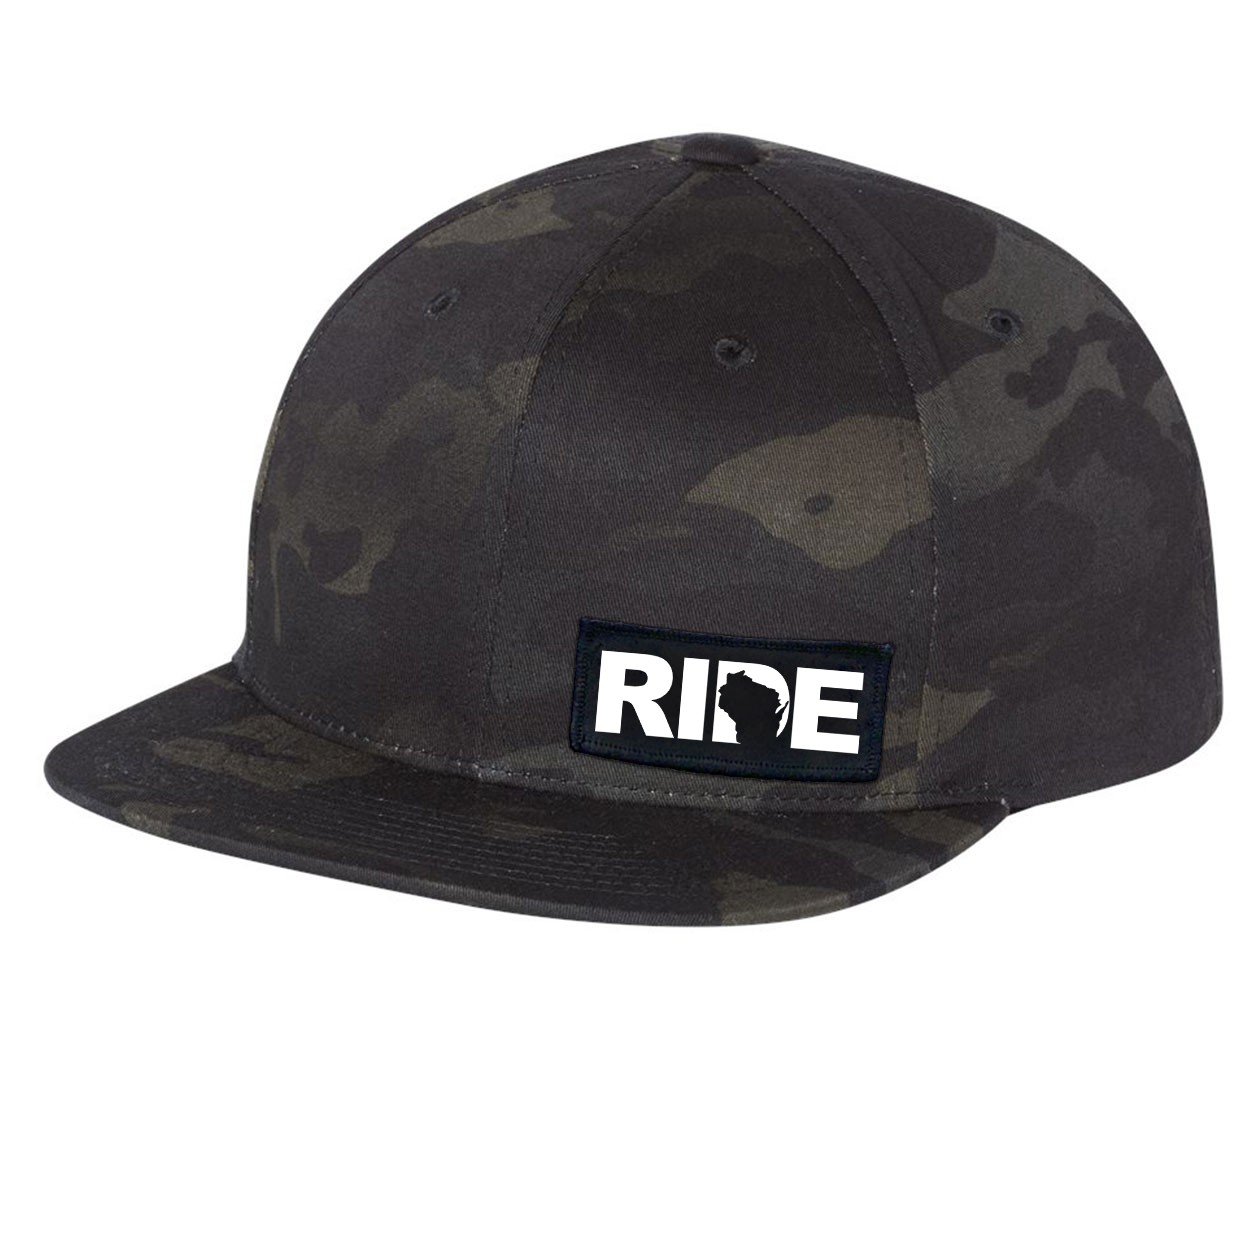 Ride Wisconsin Night Out Woven Patch Flat Brim Snapback Hat Black Camo (White Logo)